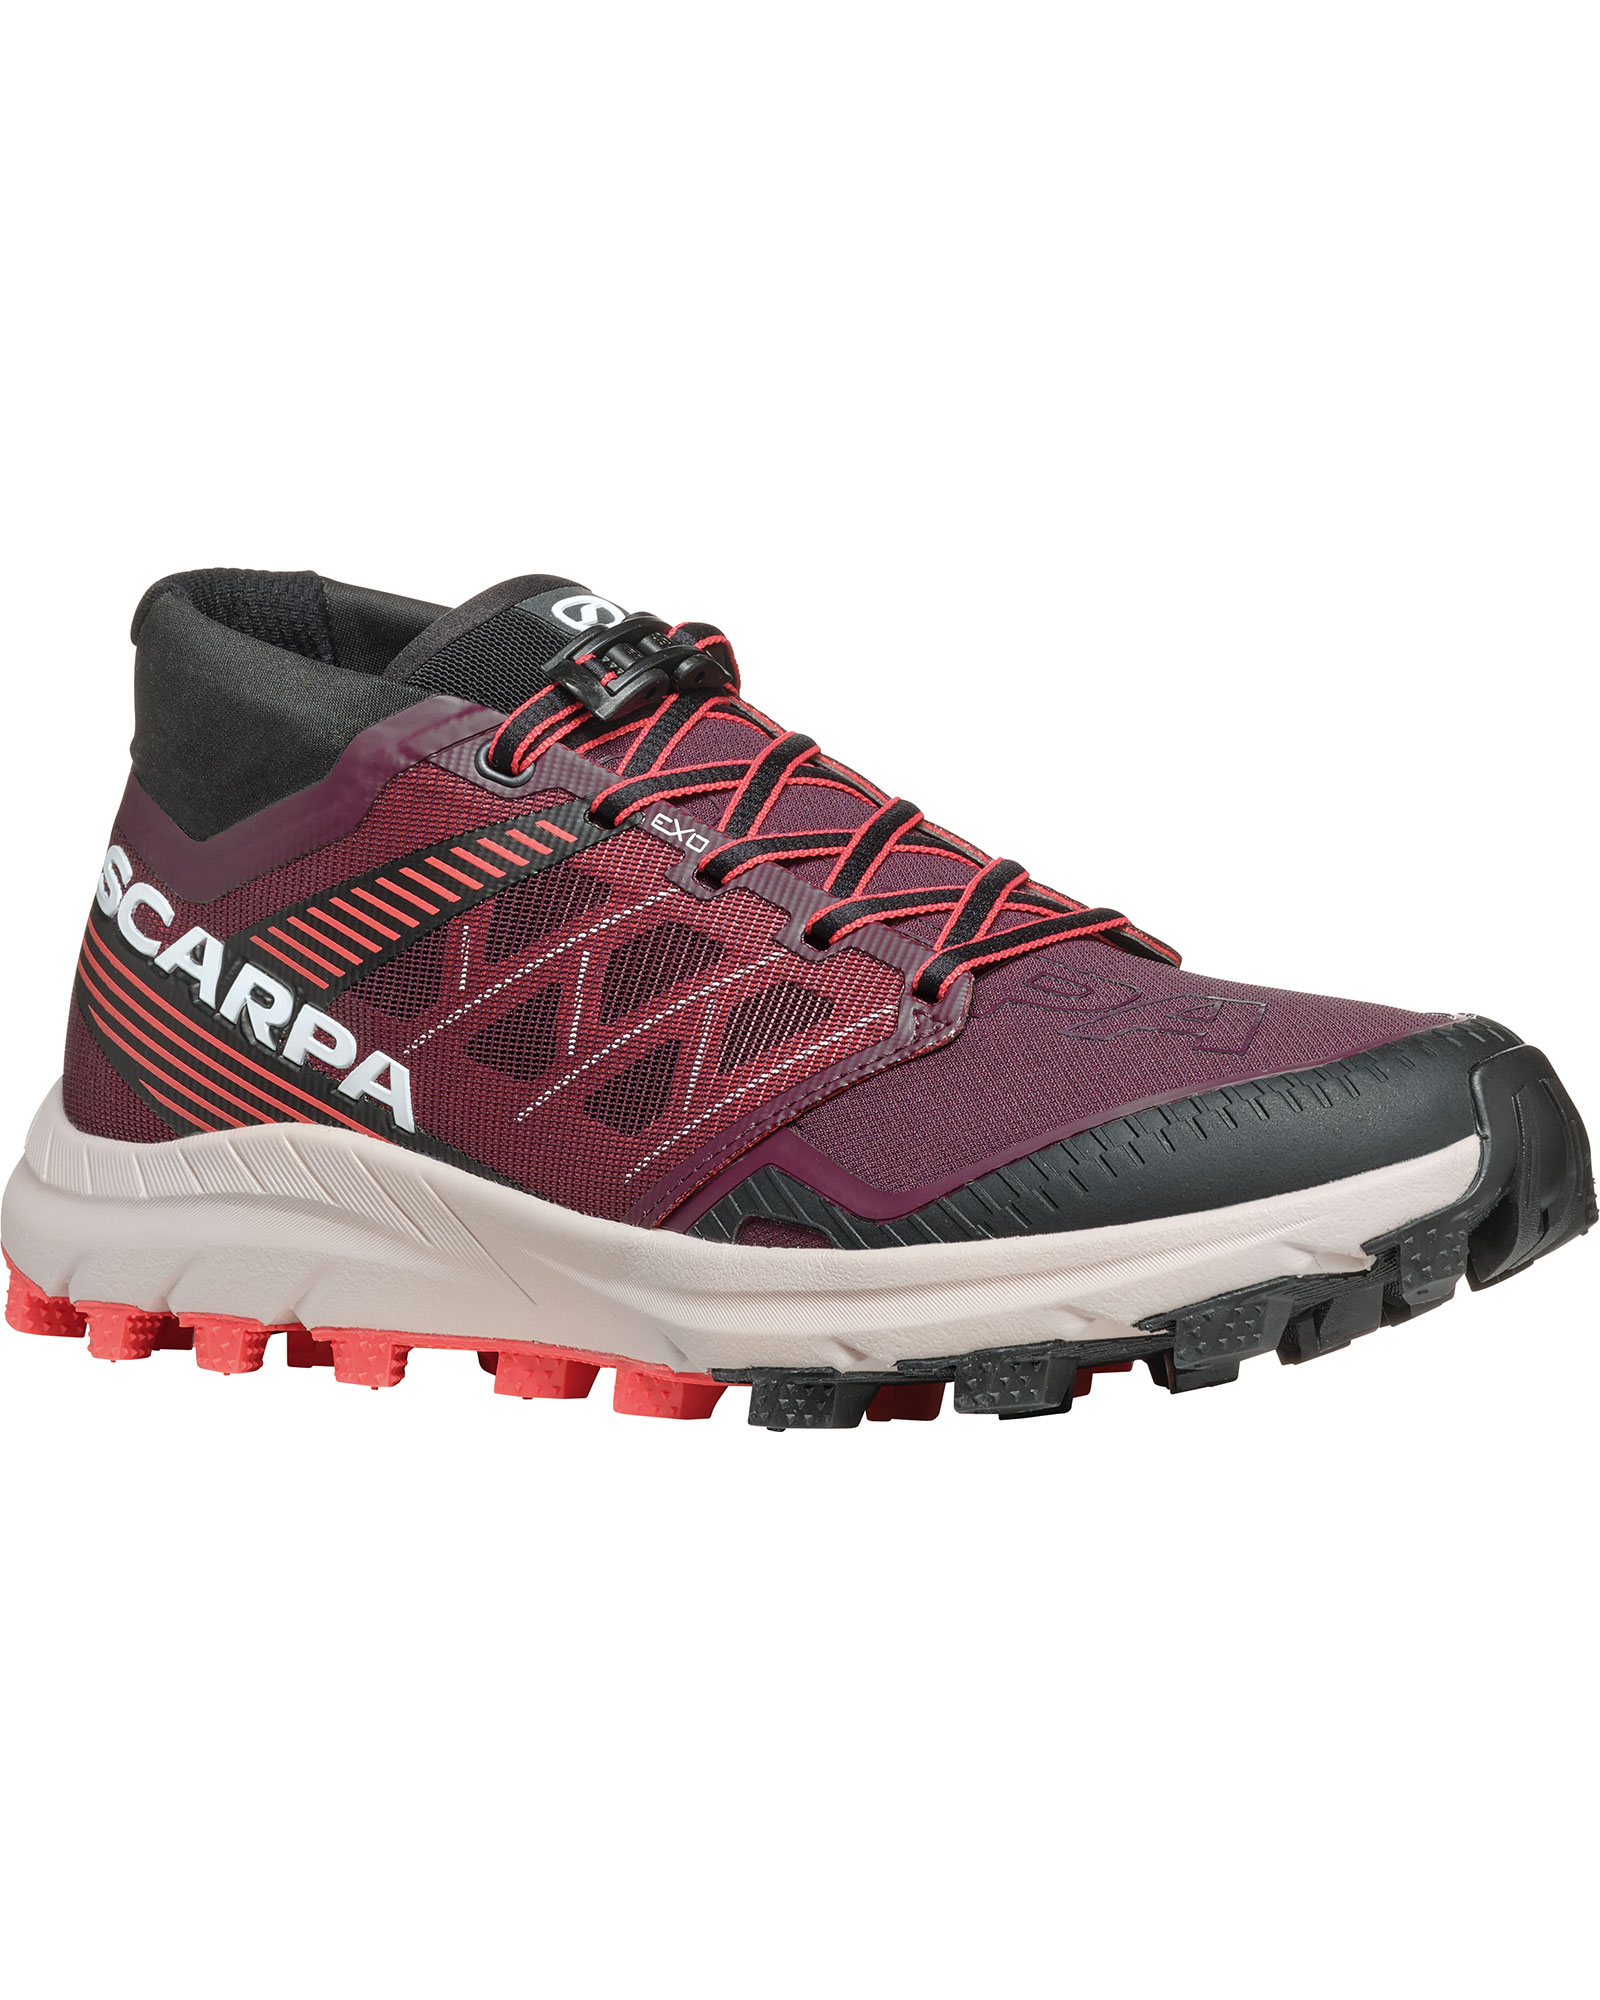 Scarpa Spin ST Women’s Trail Shoes - Russet Brown/Coral EU 41